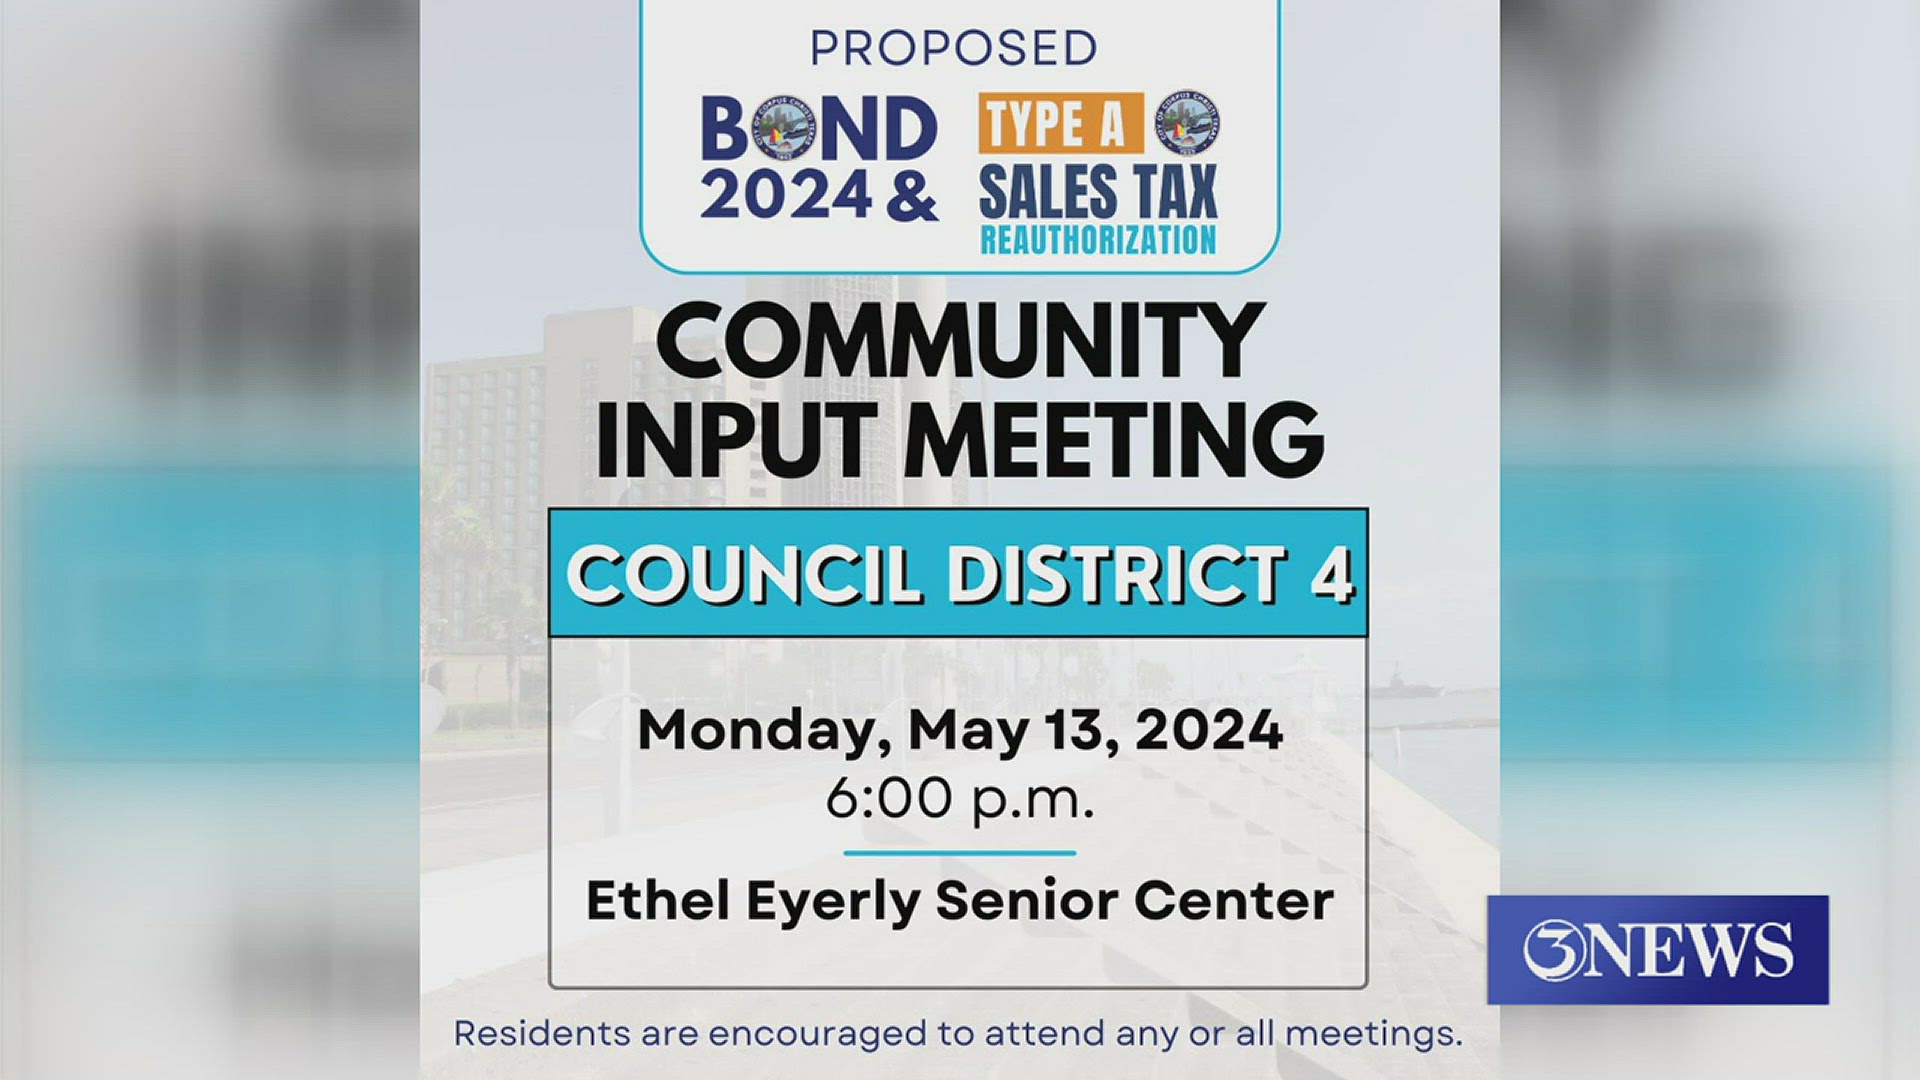 The meeting is being held at the Ethel Eyerly Senior Center at 6 p.m.